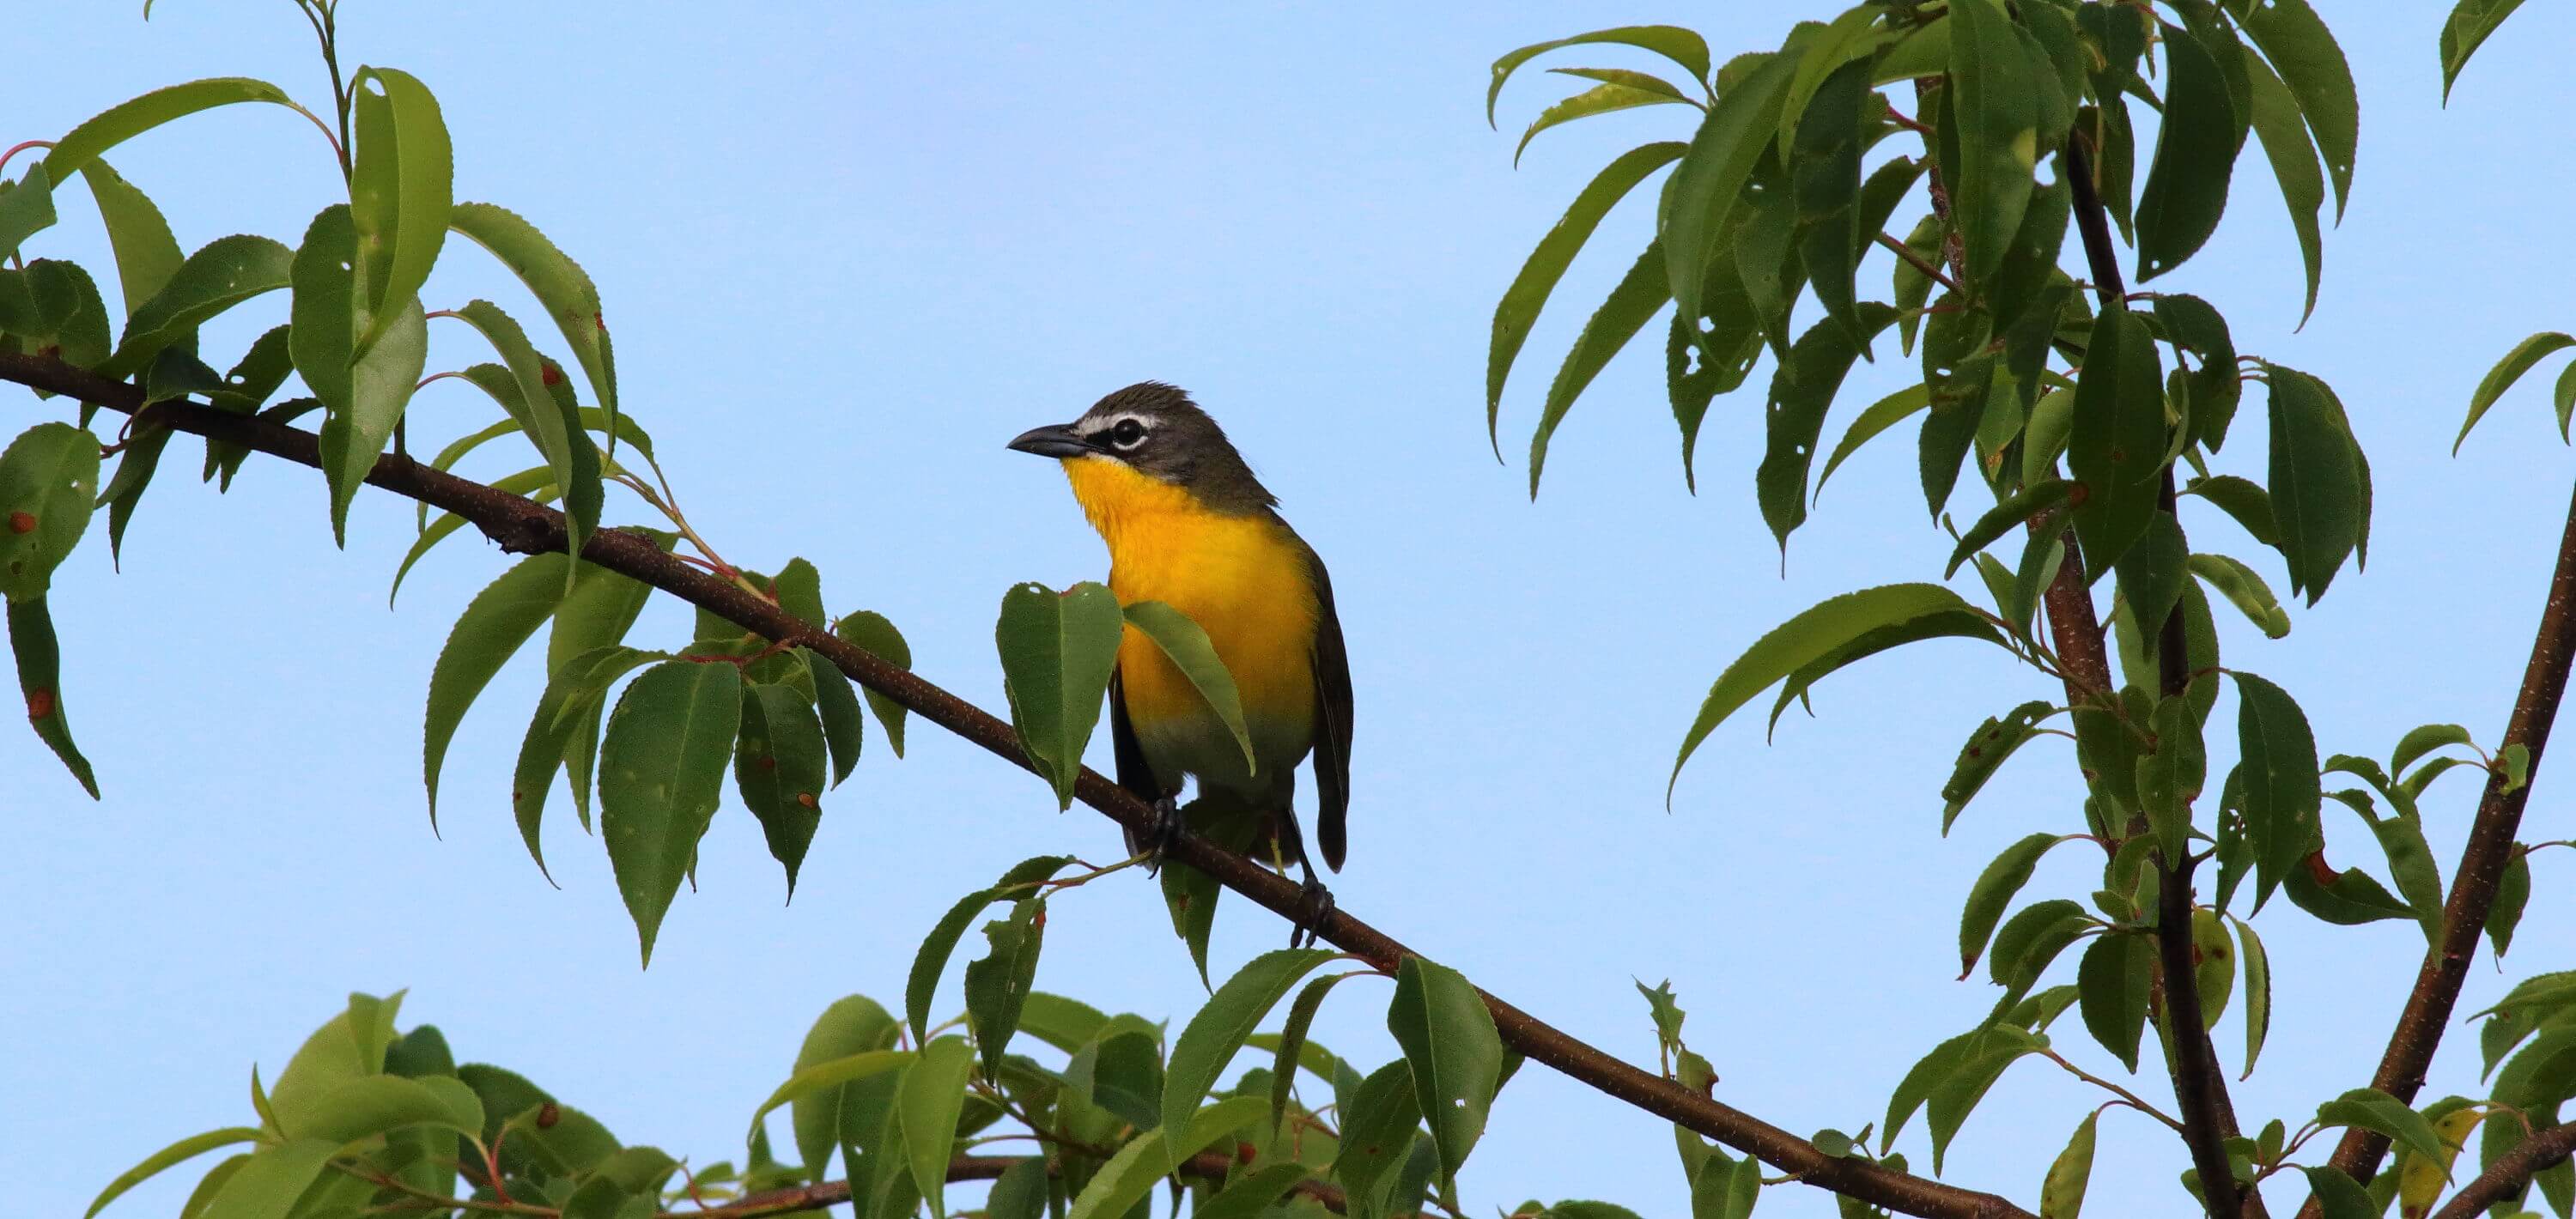 At Cane Ridge, forestry management has created grassy understory that attracts birds like this Yellow-breasted Chat. Photo by Bruce Beehler